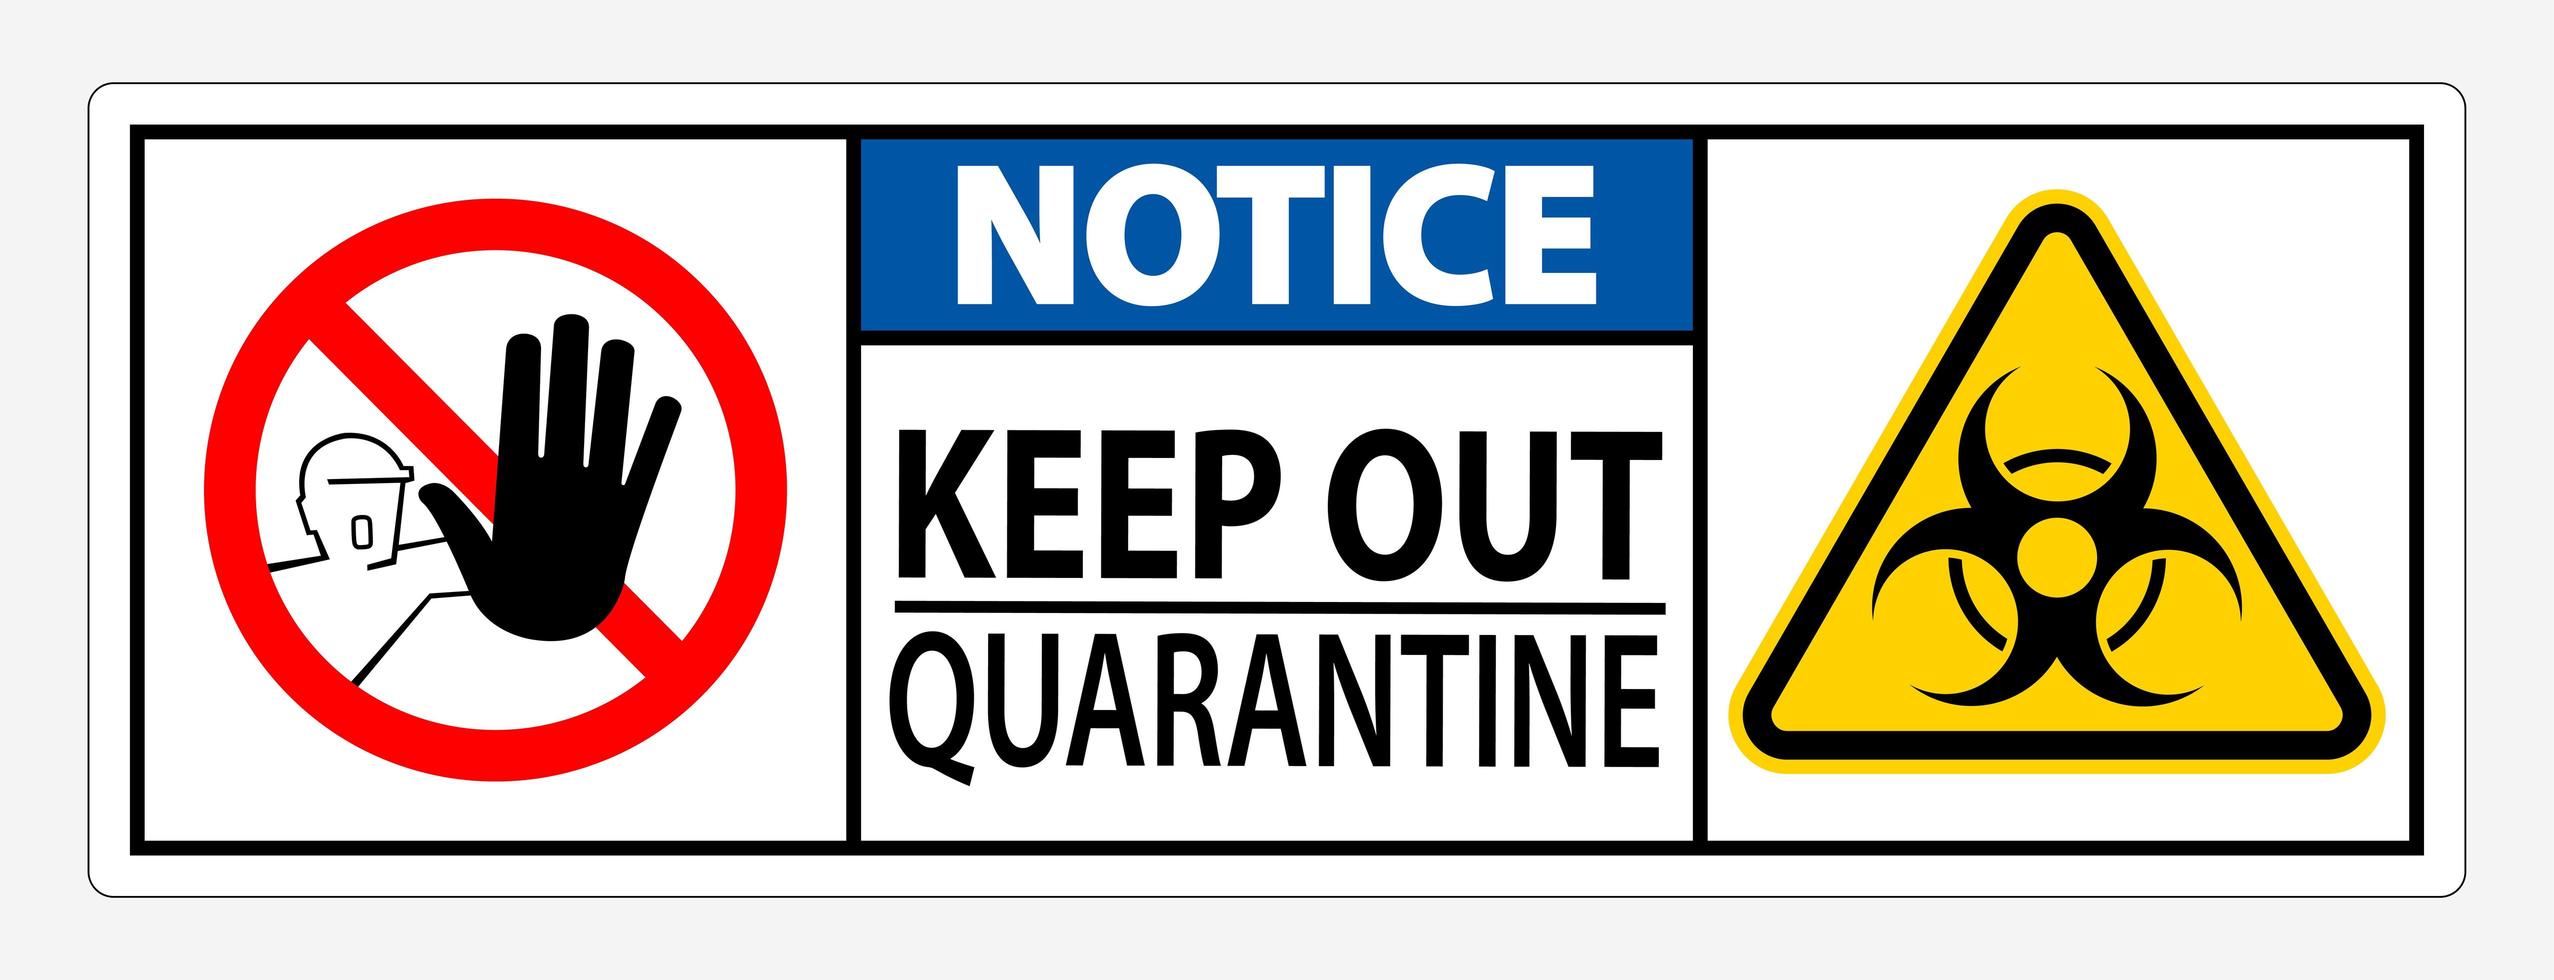 ''Keep Out Quarantine'' Sign and Symbols vector